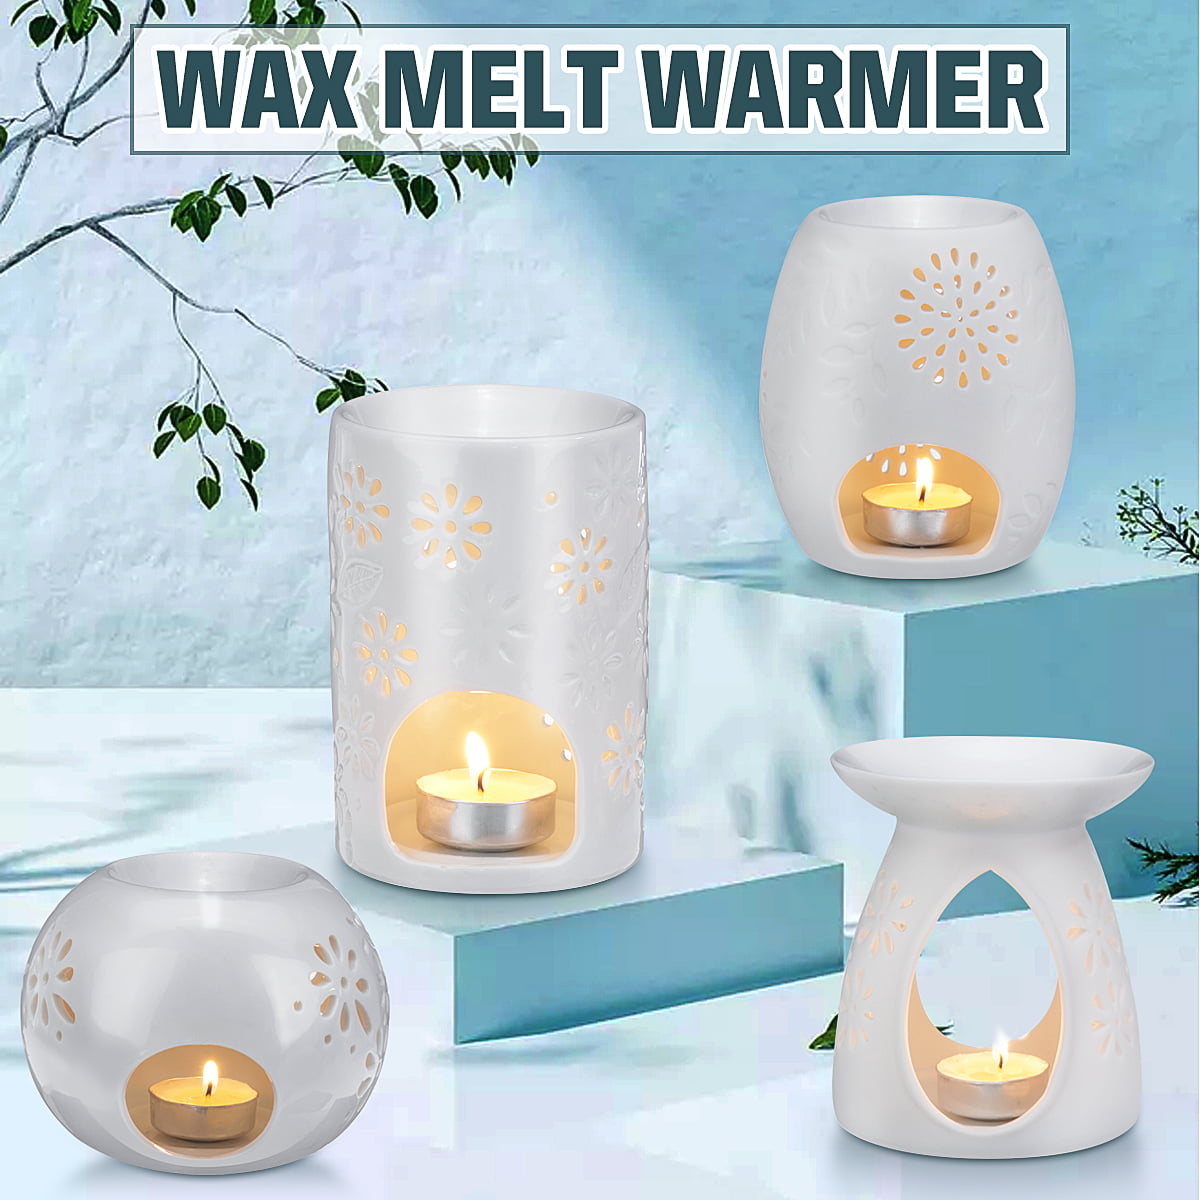 Highly scented Cinnamon Wax Melts and 18 scented Tealights Kiss Thy Bliss Premium Wax Melt Burner Set Beautiful Hand Shaped Ceramic Oil Burner a complete all in one set for your home